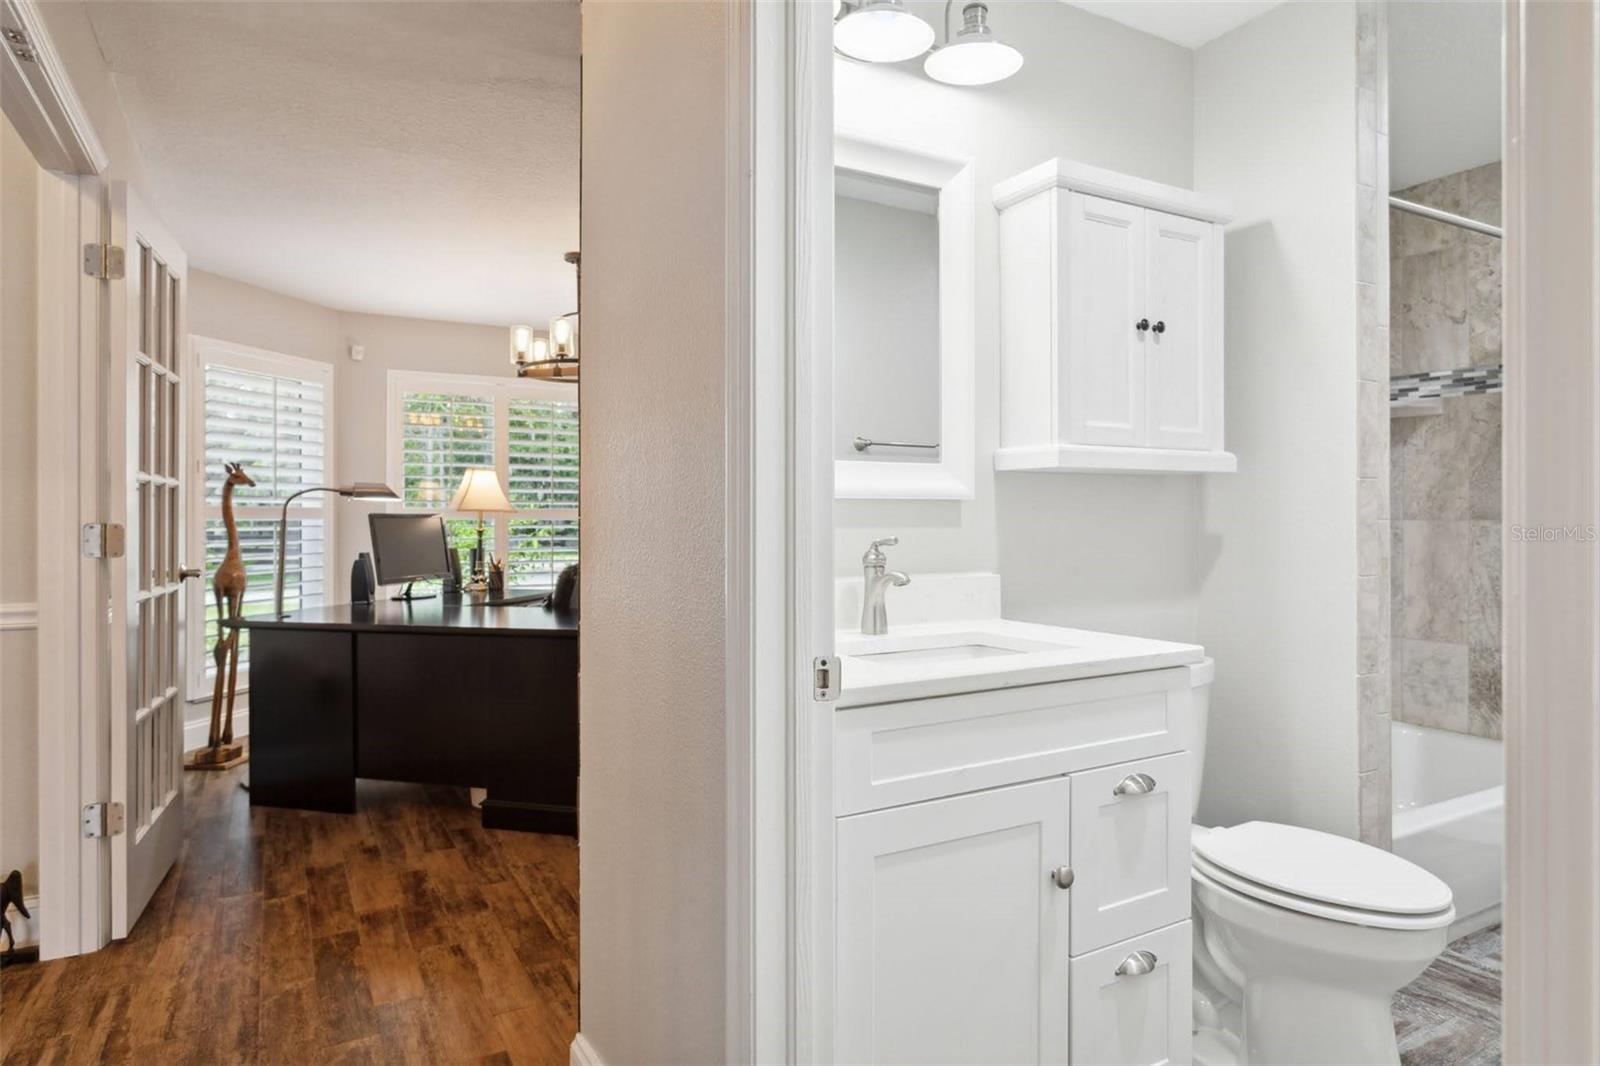 Full bath room is situationed adjacent to the family room.